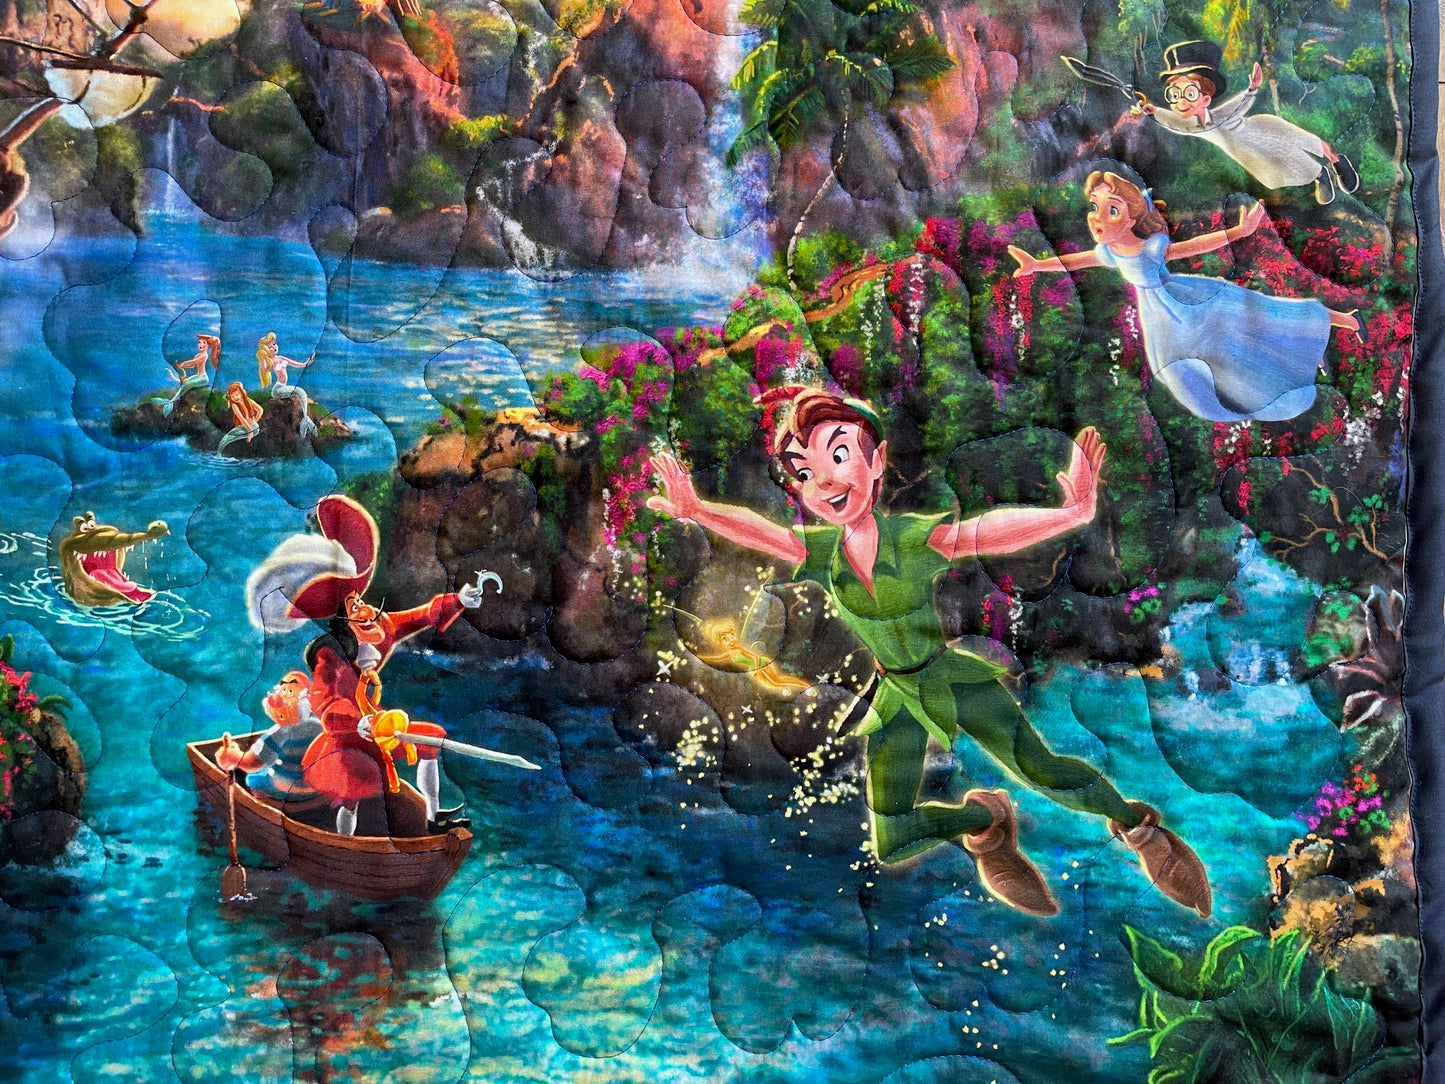 PETER PAN NEVER LAND Inspired Quilted Blanket 36"x44" DIGITALLY PRINTED FABRIC